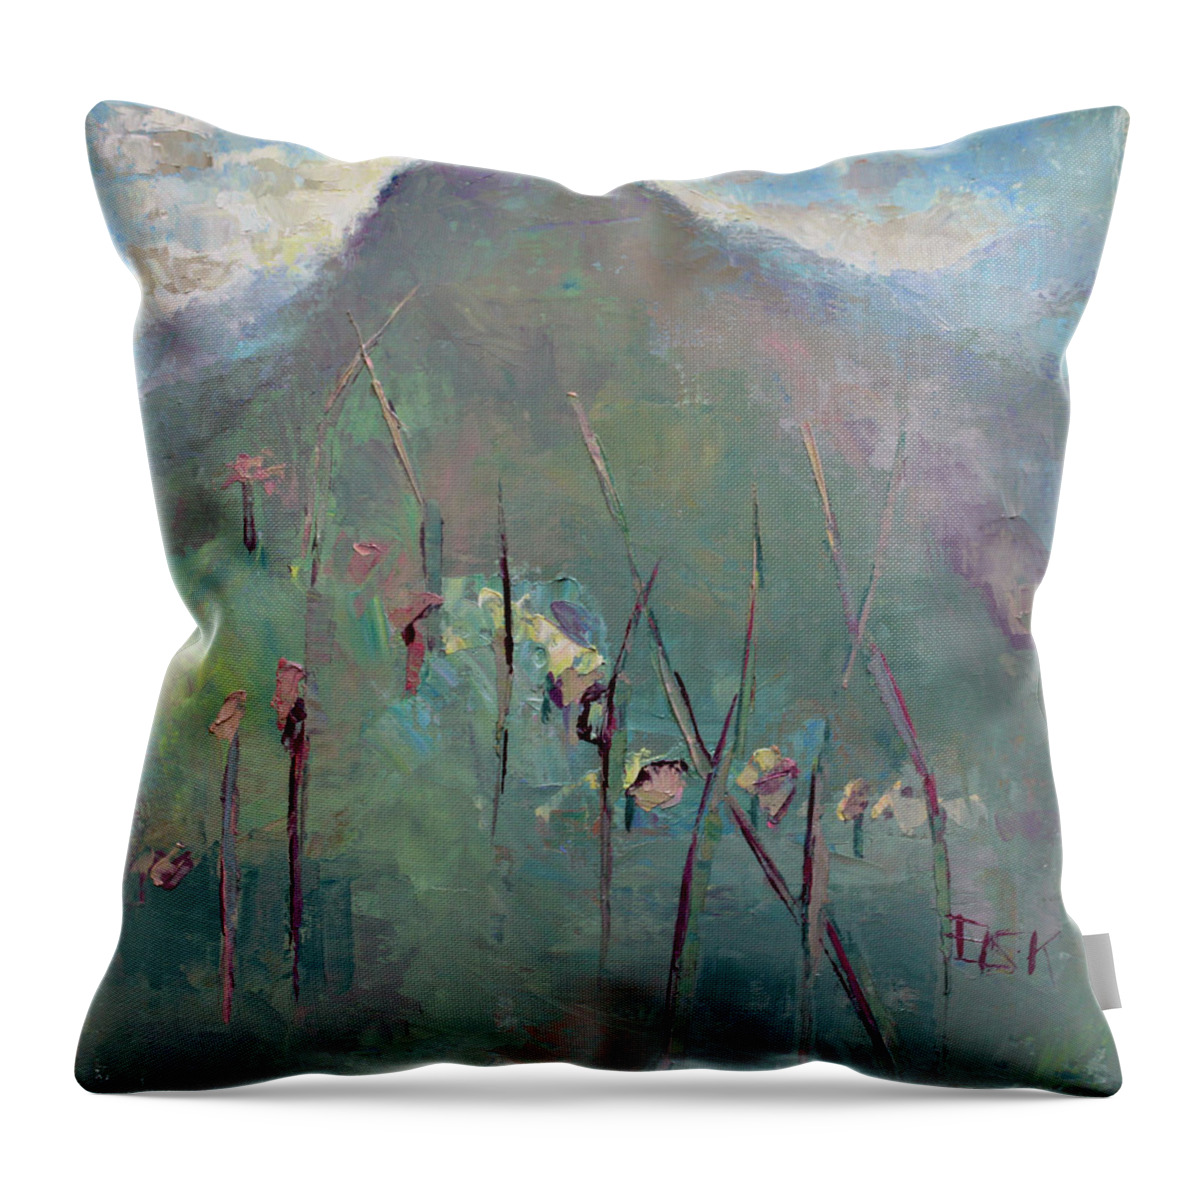 Landscape Throw Pillow featuring the painting Mountain Visit by Becky Kim